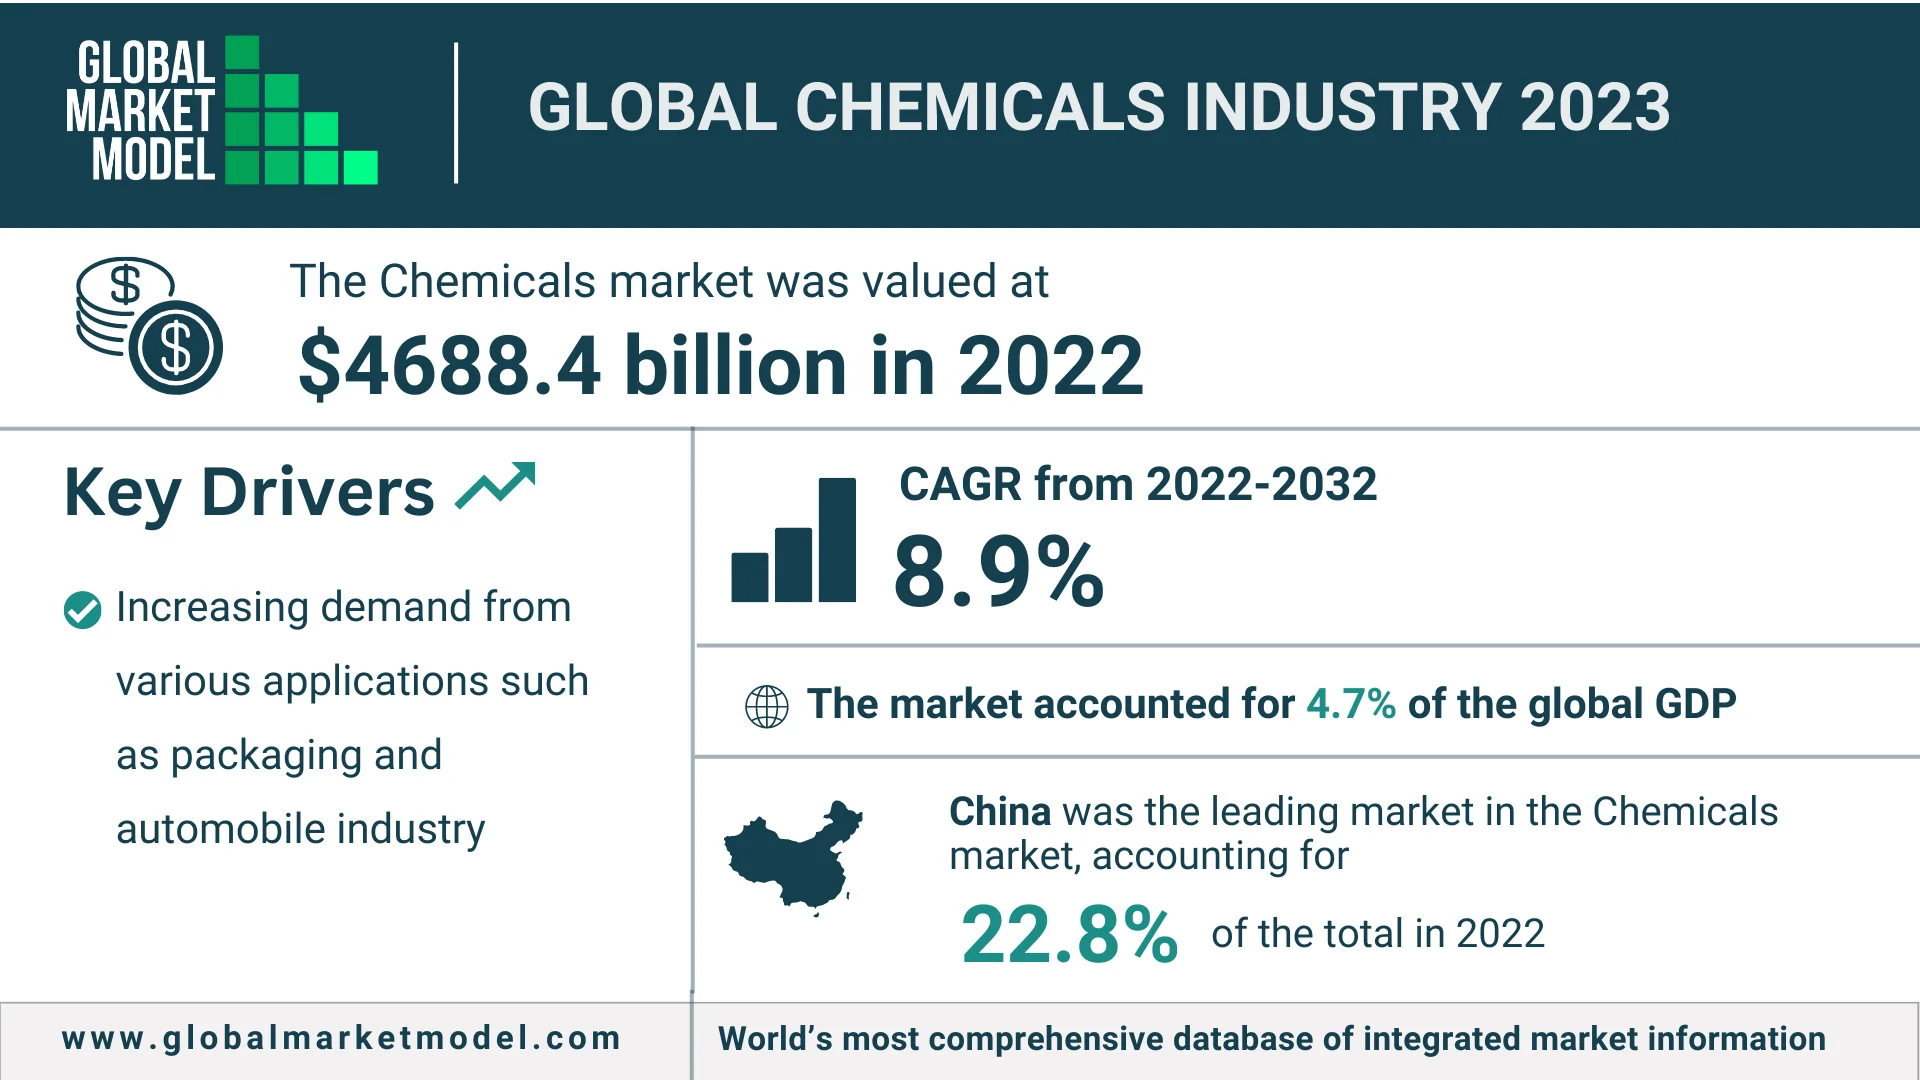 Global Chemicals Industry 2023